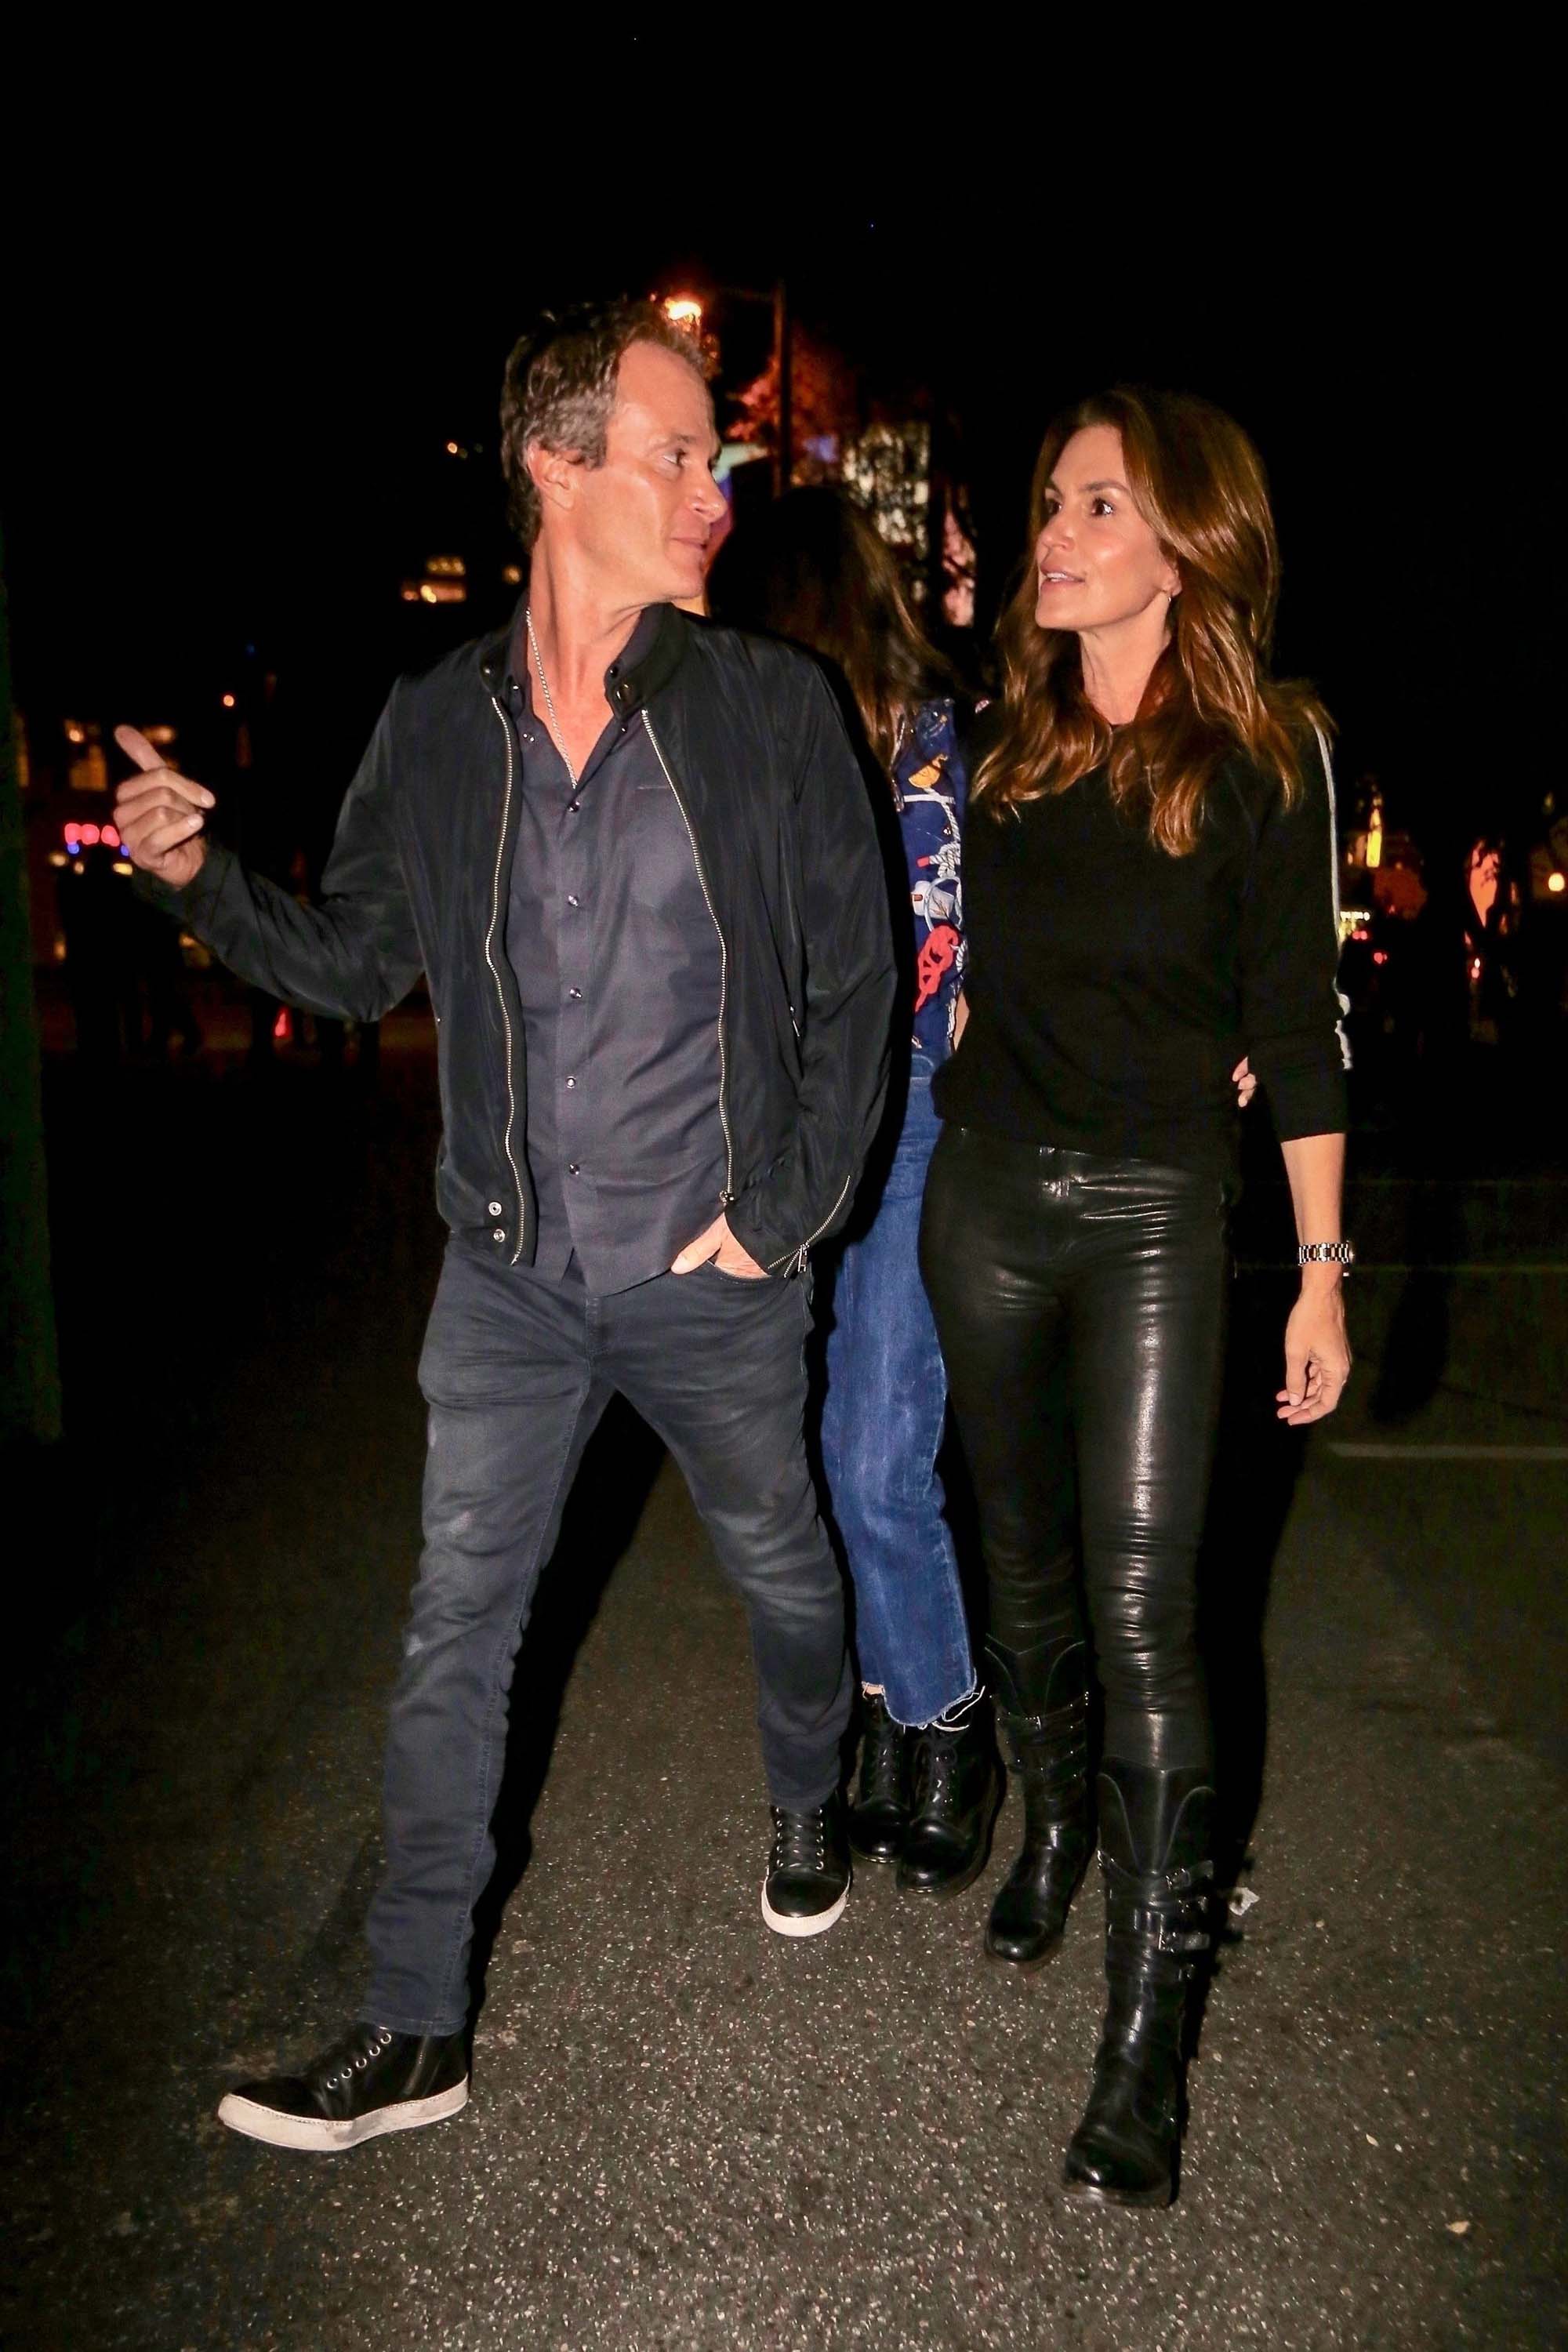 Cindy Crawford arrives at an event